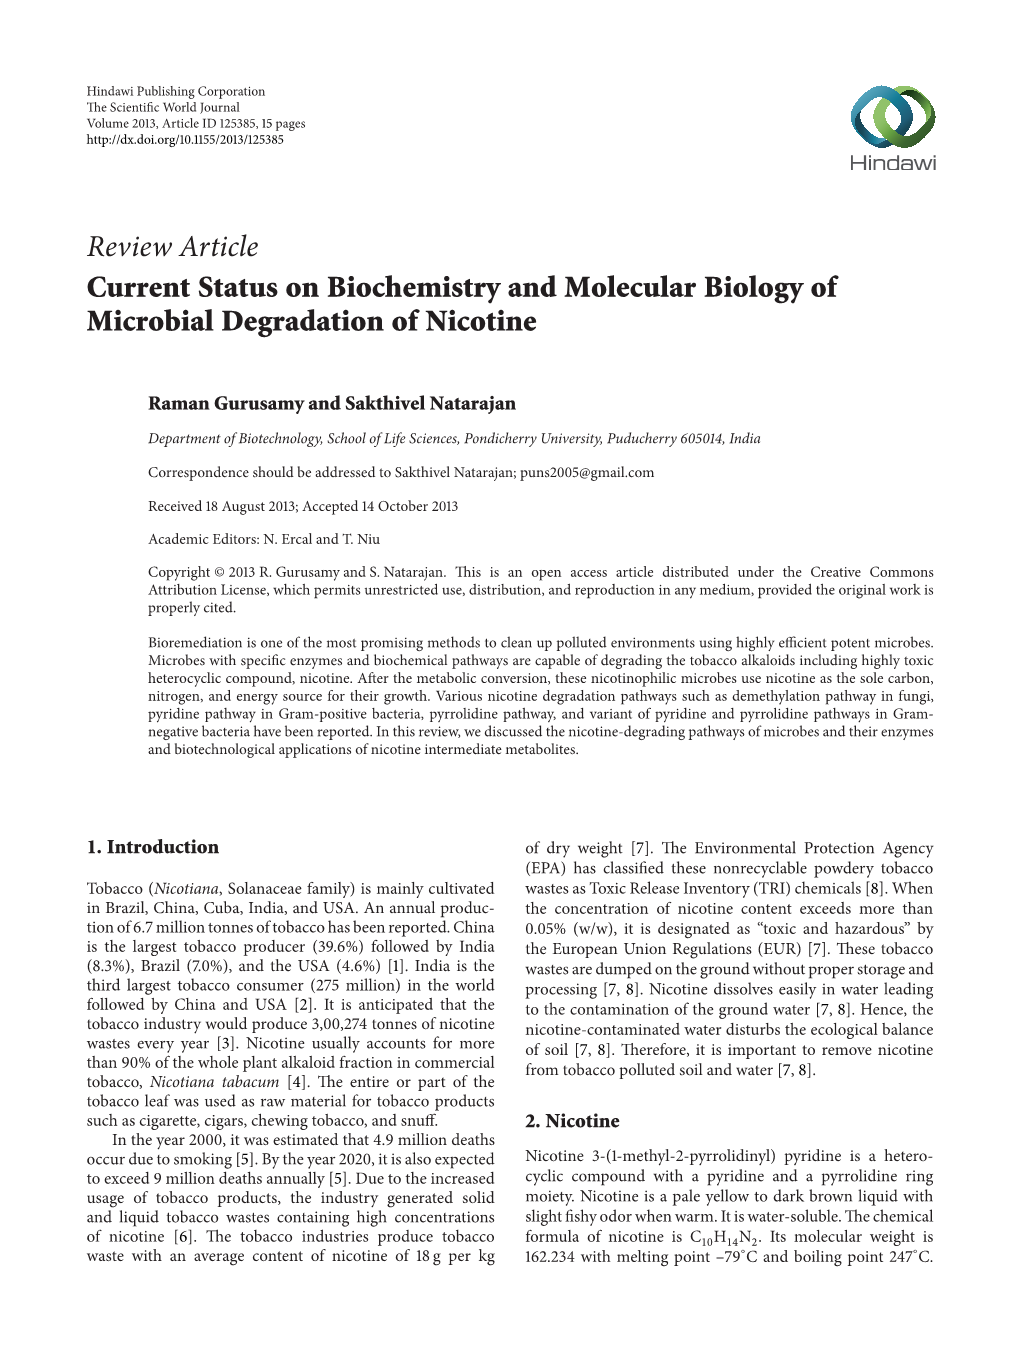 Review Article Current Status on Biochemistry and Molecular Biology of Microbial Degradation of Nicotine